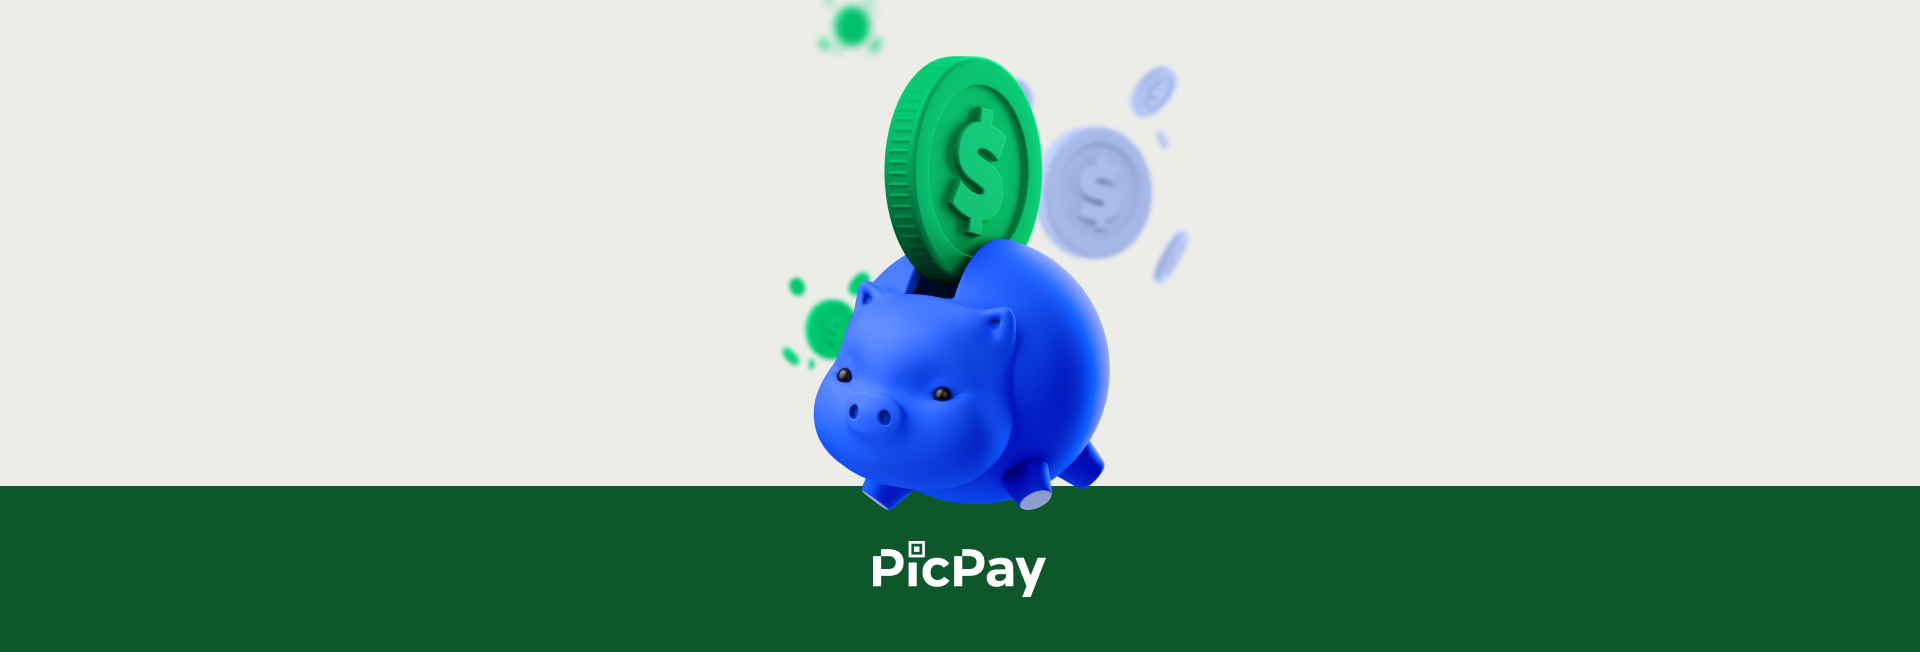 PicPay - Investing in People